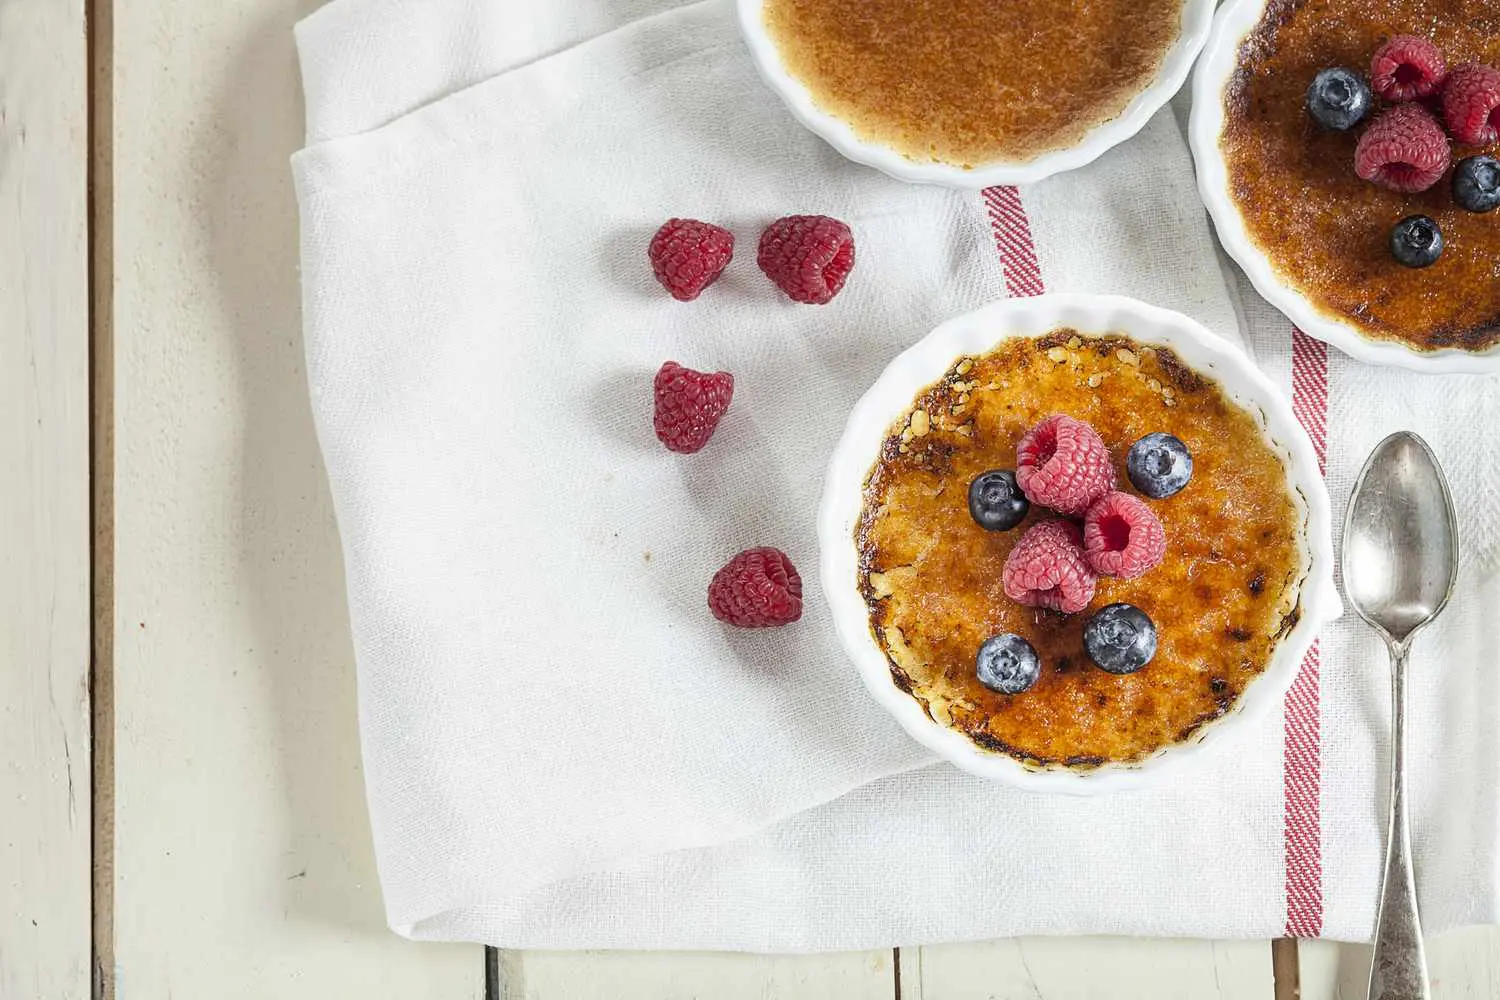 smoked creme brulee - What is it called when you burn the top of a crème brûlée